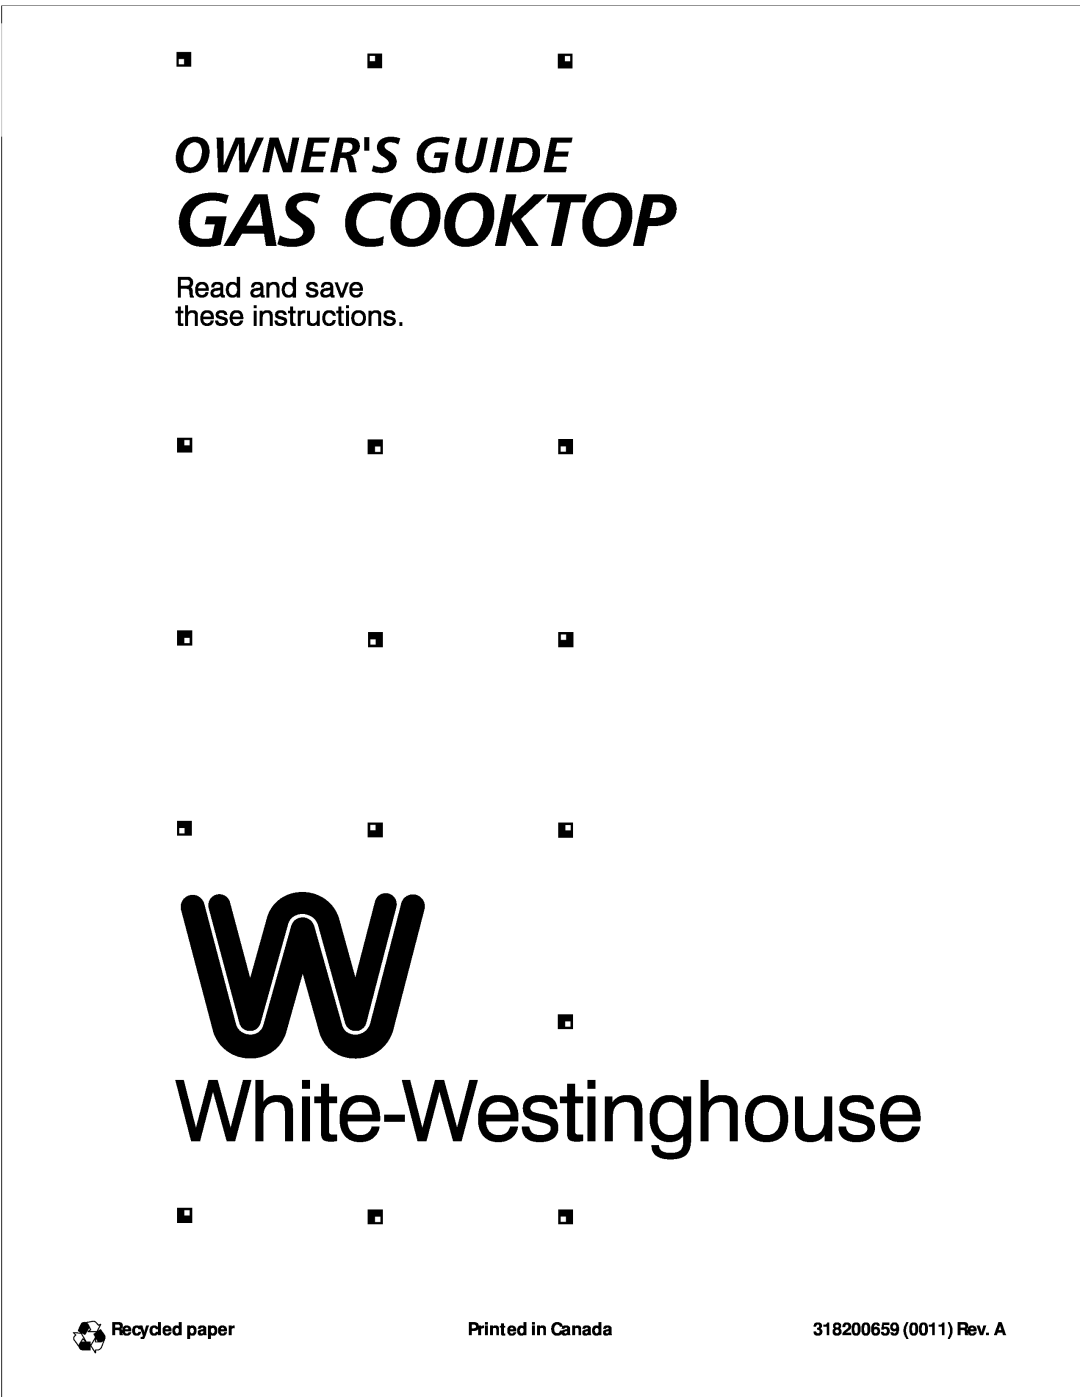 White-Westinghouse manual Recycled paper, 318200659 0011 Rev. A 